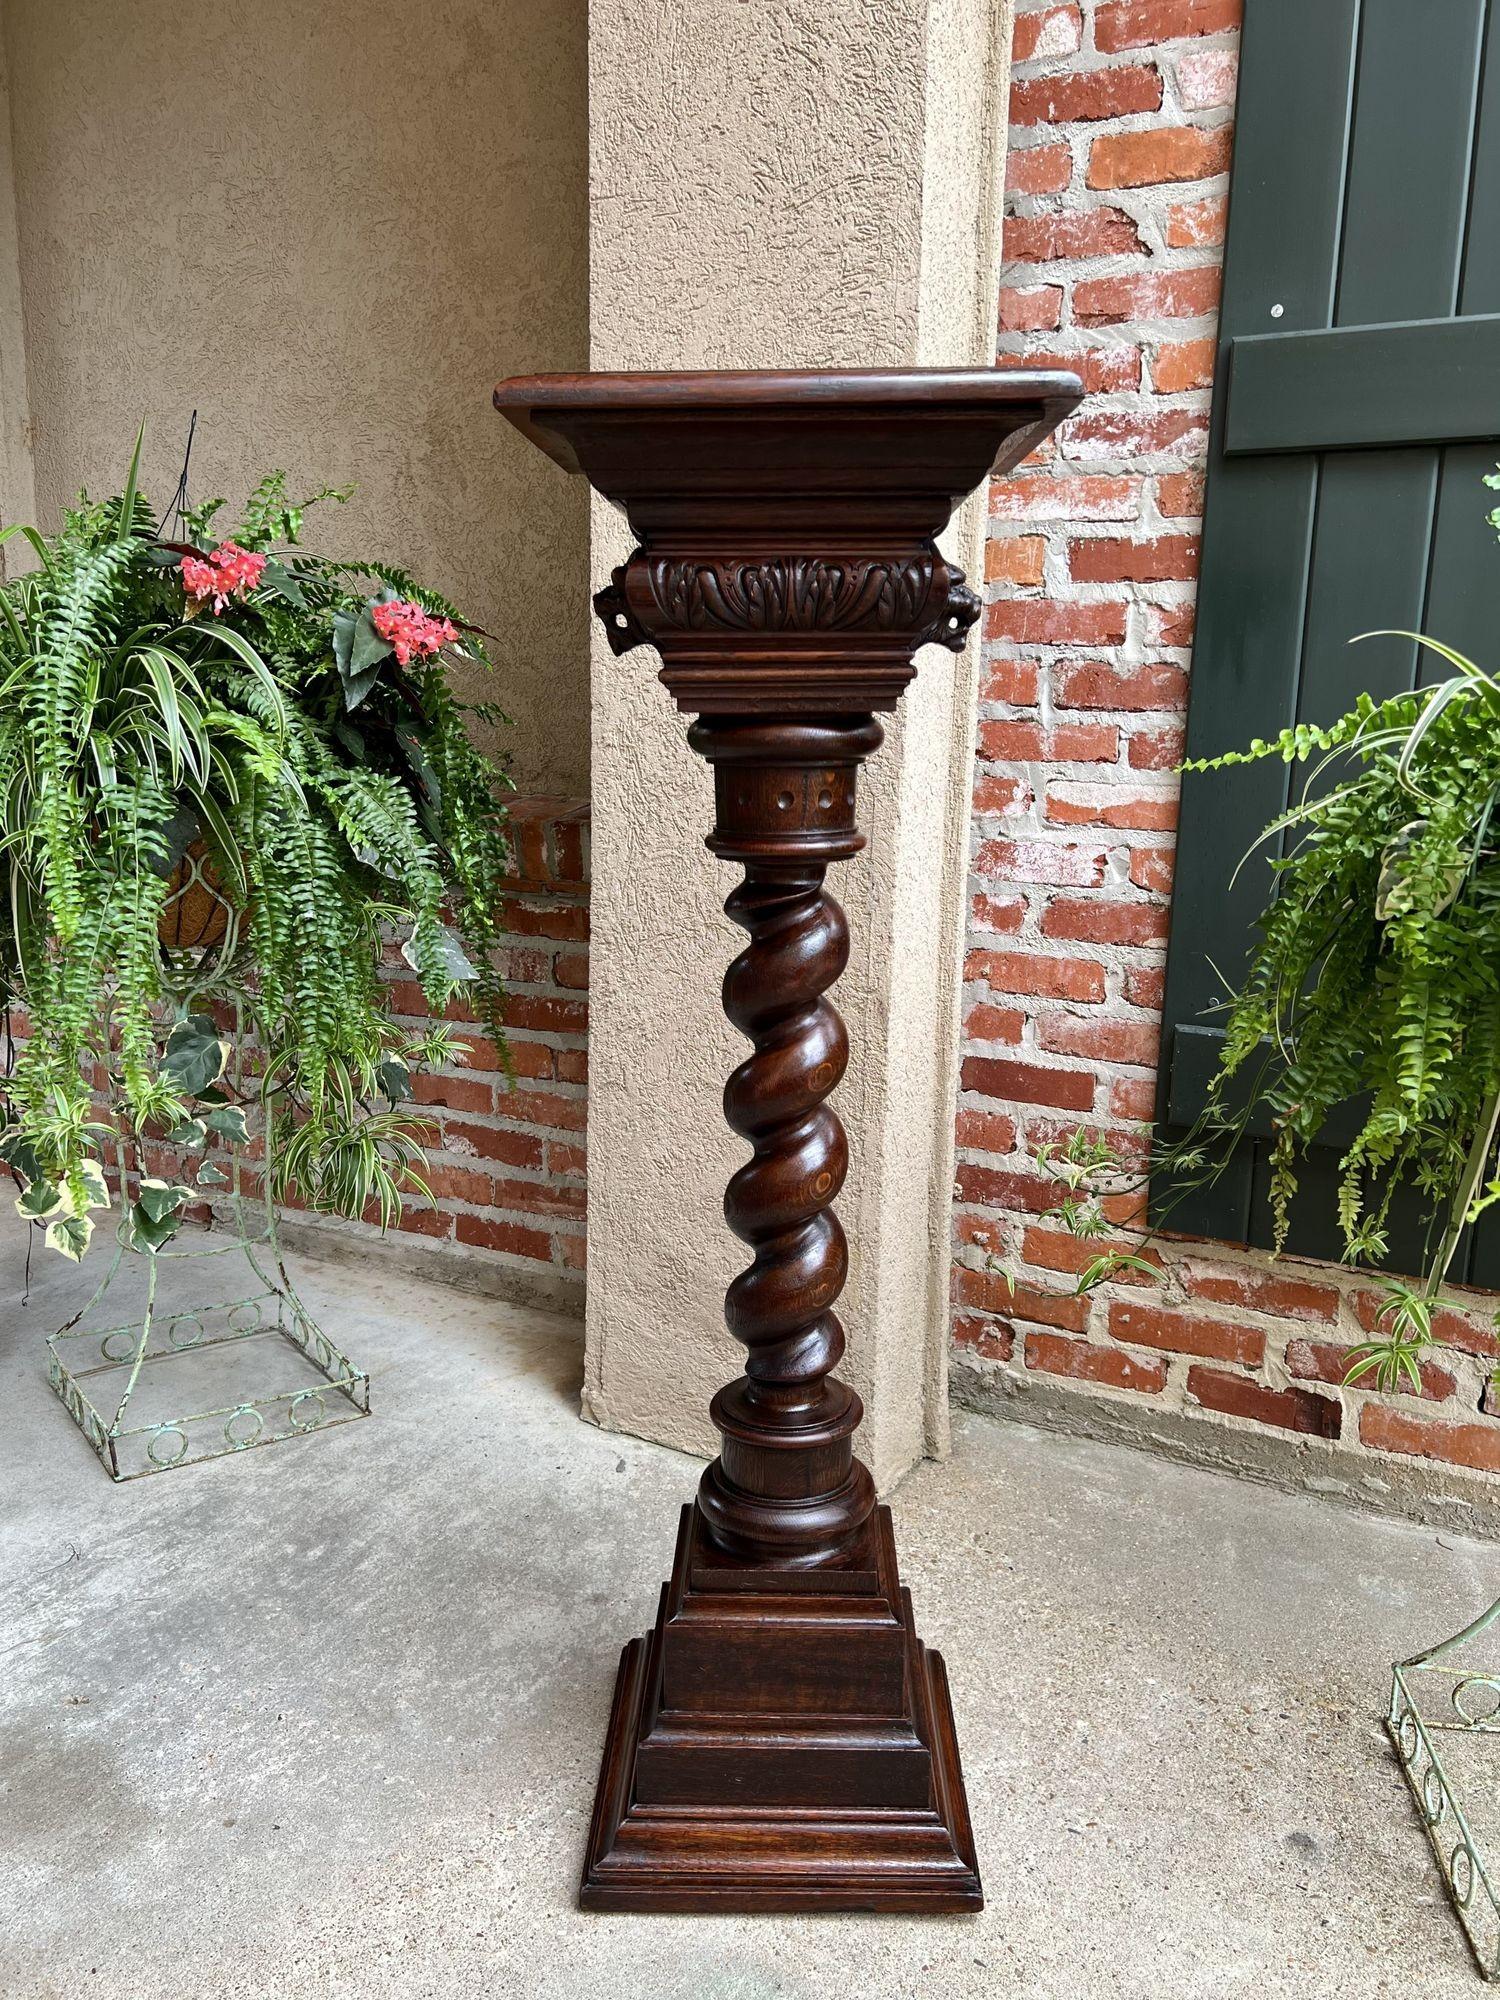 19th century French Barley Twist Pedestal Bronze Plant Stand Column Renaissance.
 
Direct from France, a beautiful 19th century pedestal display stand.
An ornate capital features a carved panel with dimensional, hand carved Renaissance lions on